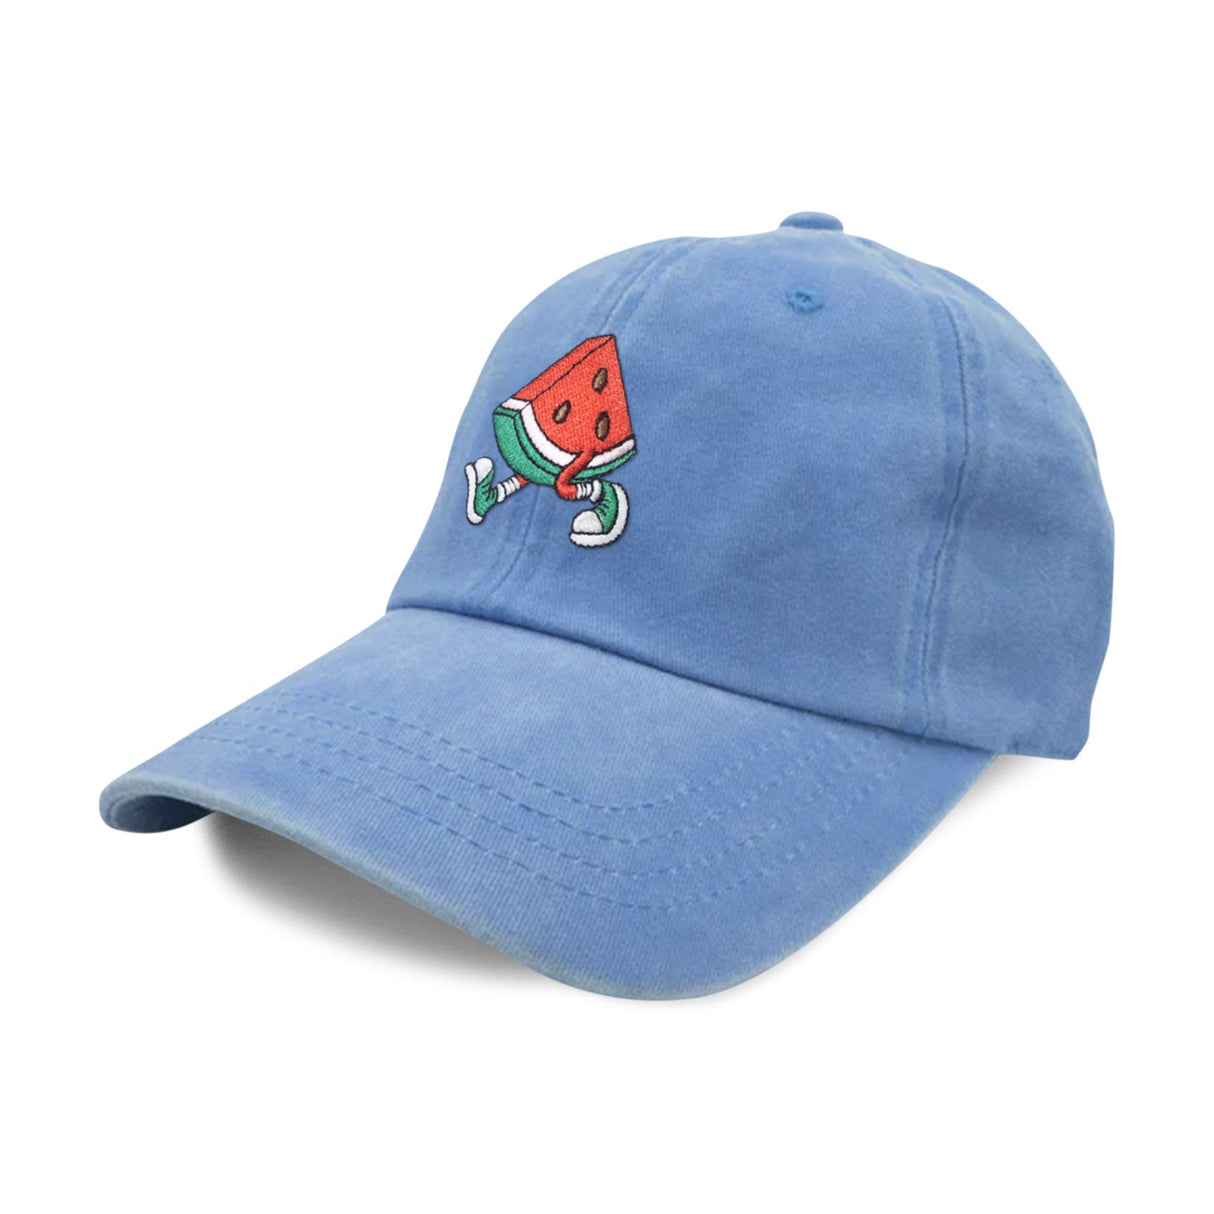 The Best Watermelon Embroidered Pigment Dye Cap